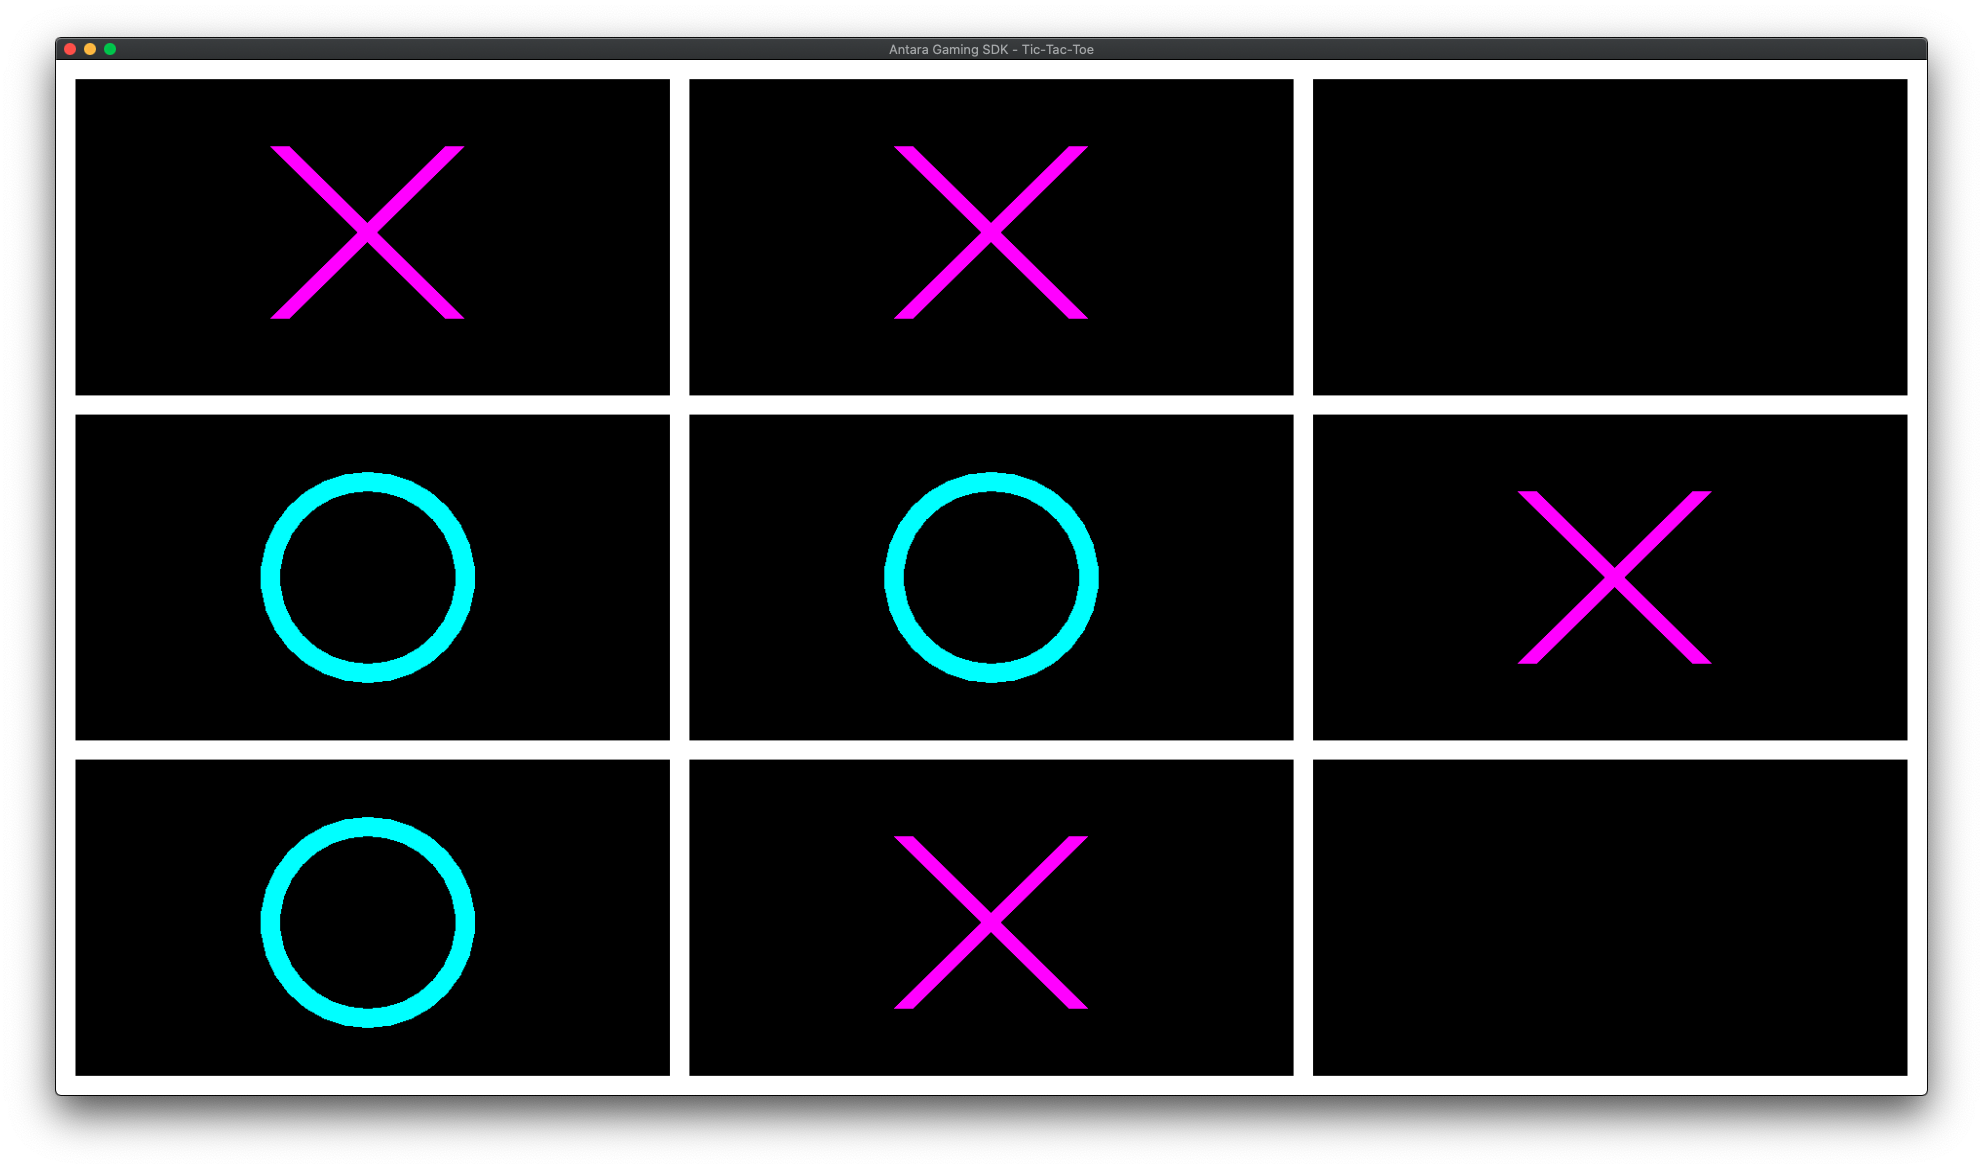 ../../_images/tictactoe-playing.png